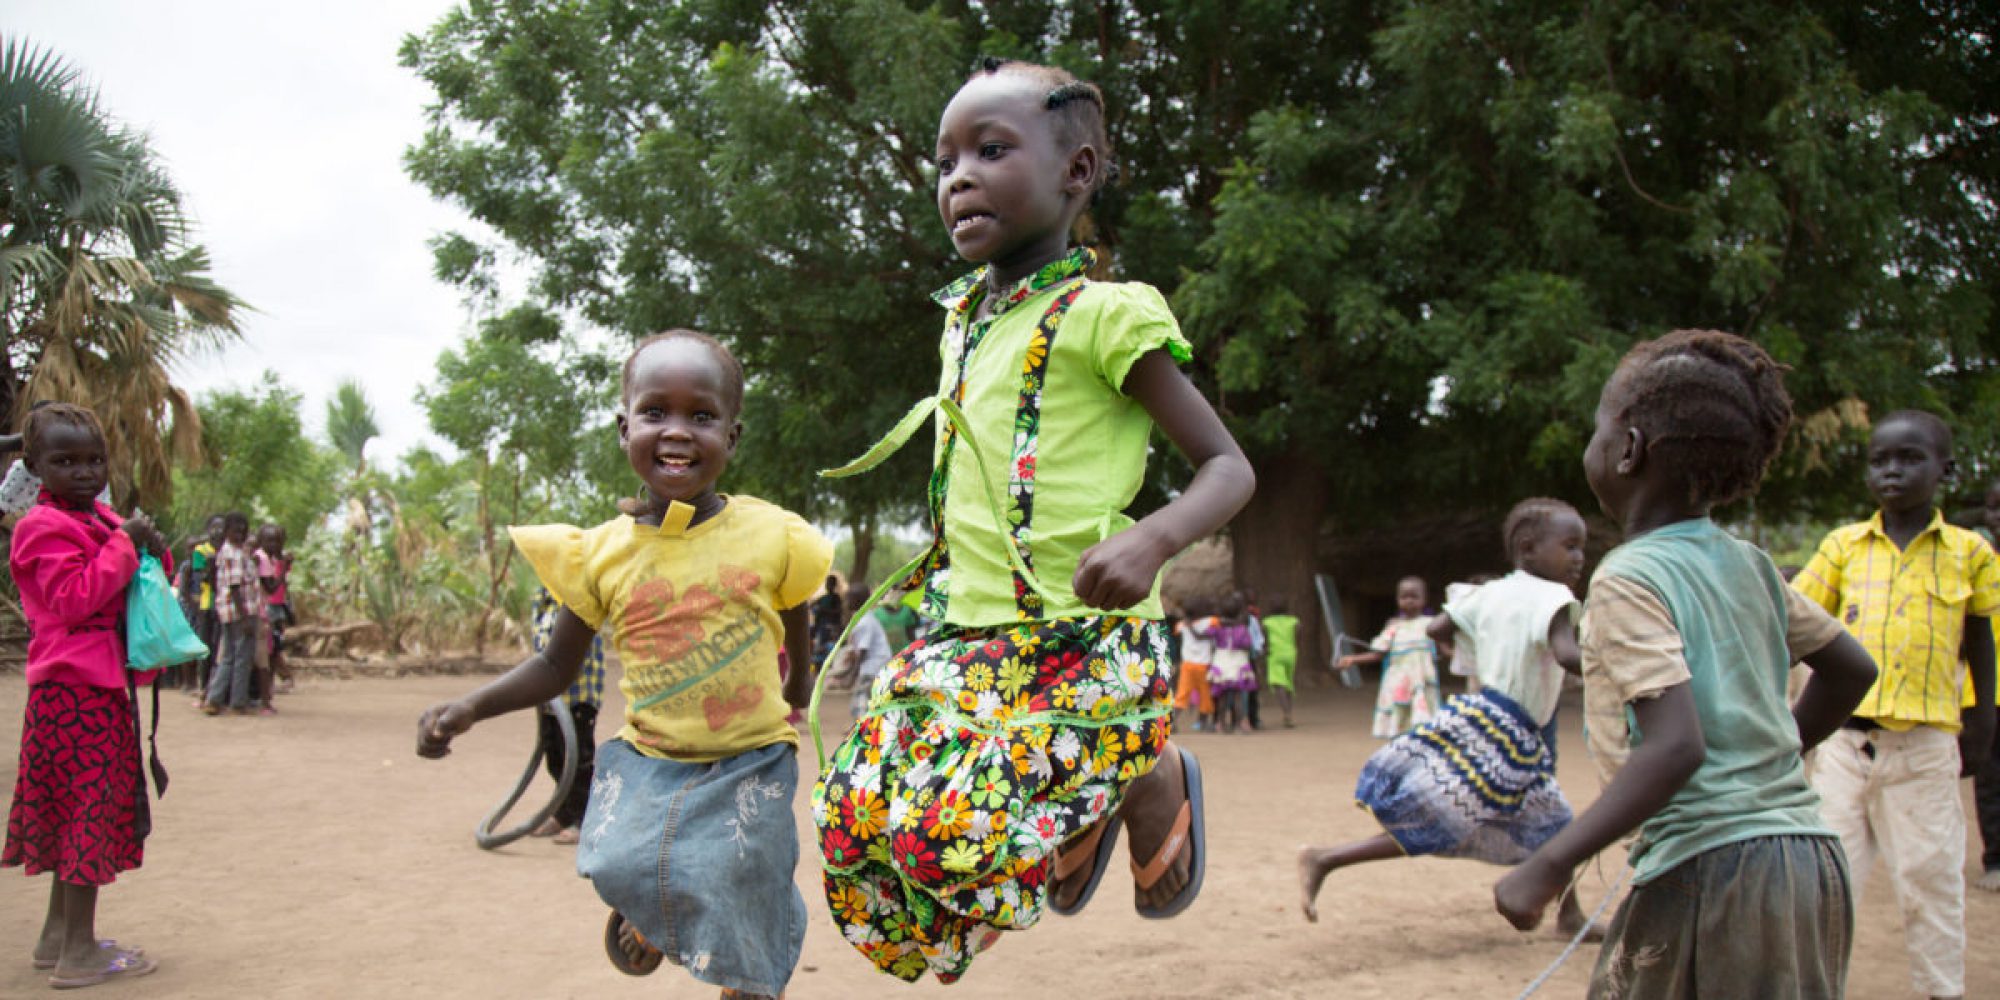 Children play after lunch at the Gulawein school, in Maban, South Sudan.